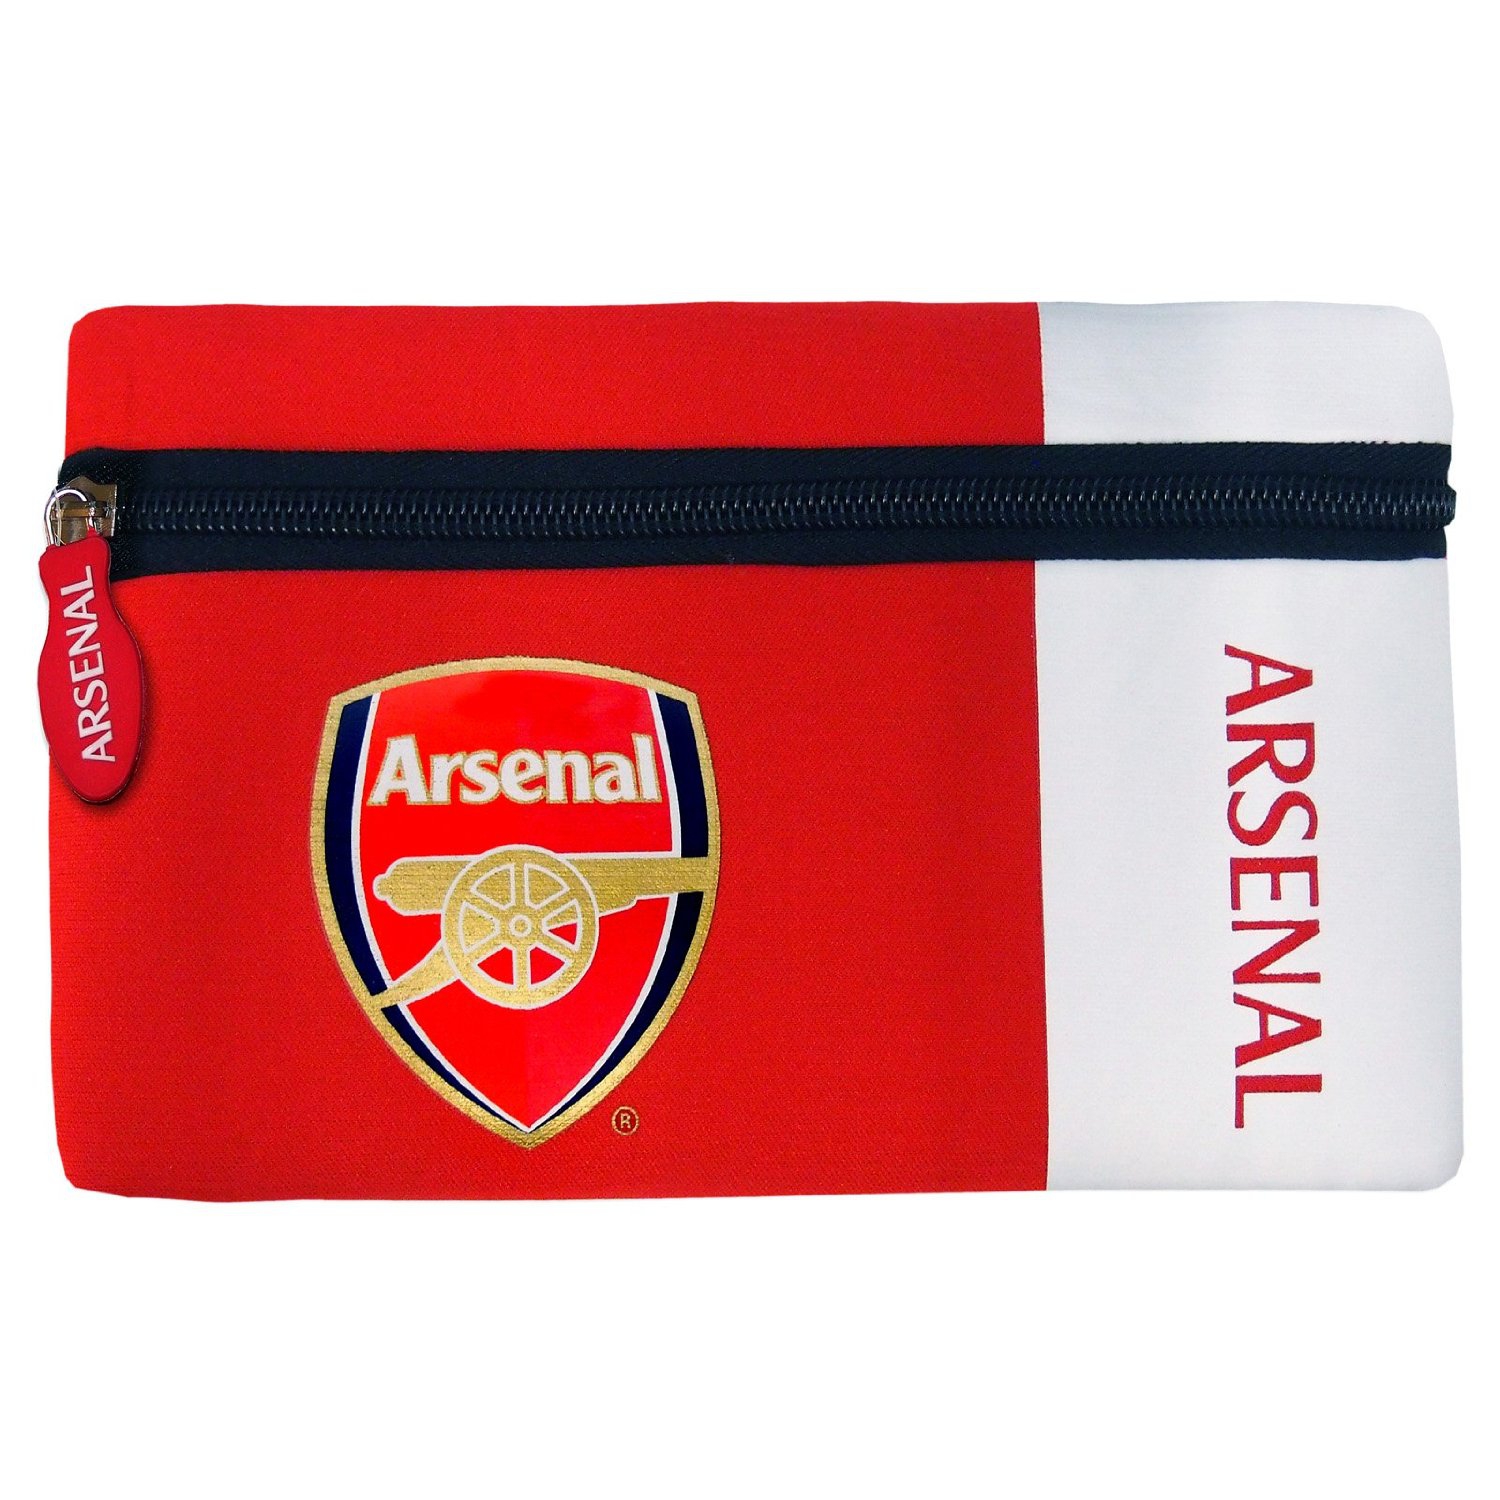 Arsenal Fc 'Woodmark' Football Pencil Case Official Stationery